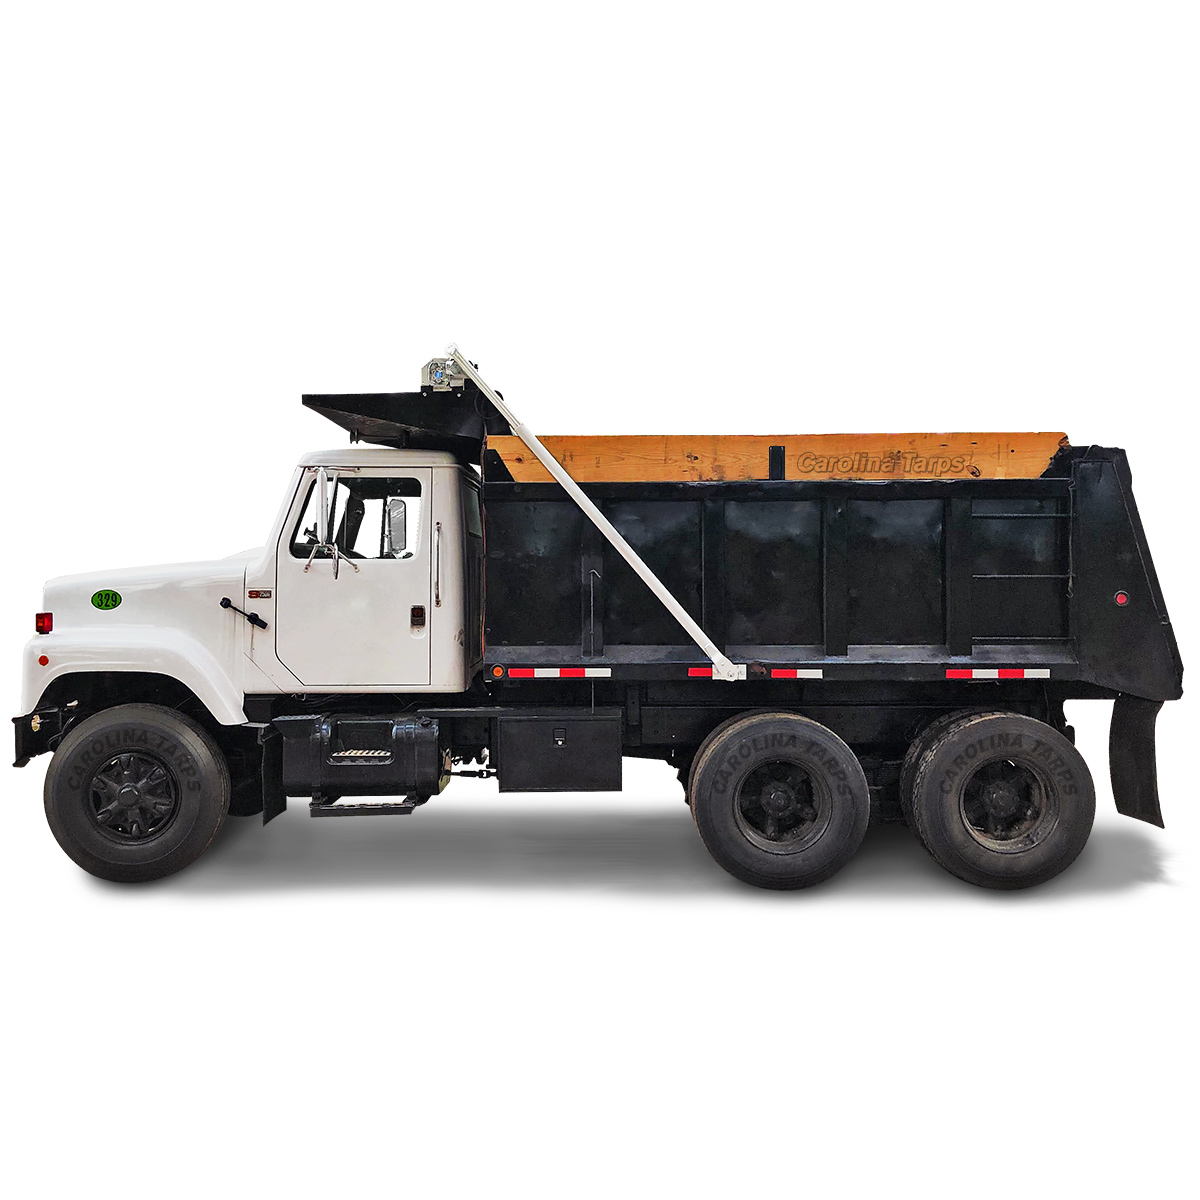 Electric Tarp System for Dump Trucks - ALUMINUM 4 Spring Tarp Kit for Beds Up to 24' Long and UNDER 95 Wide